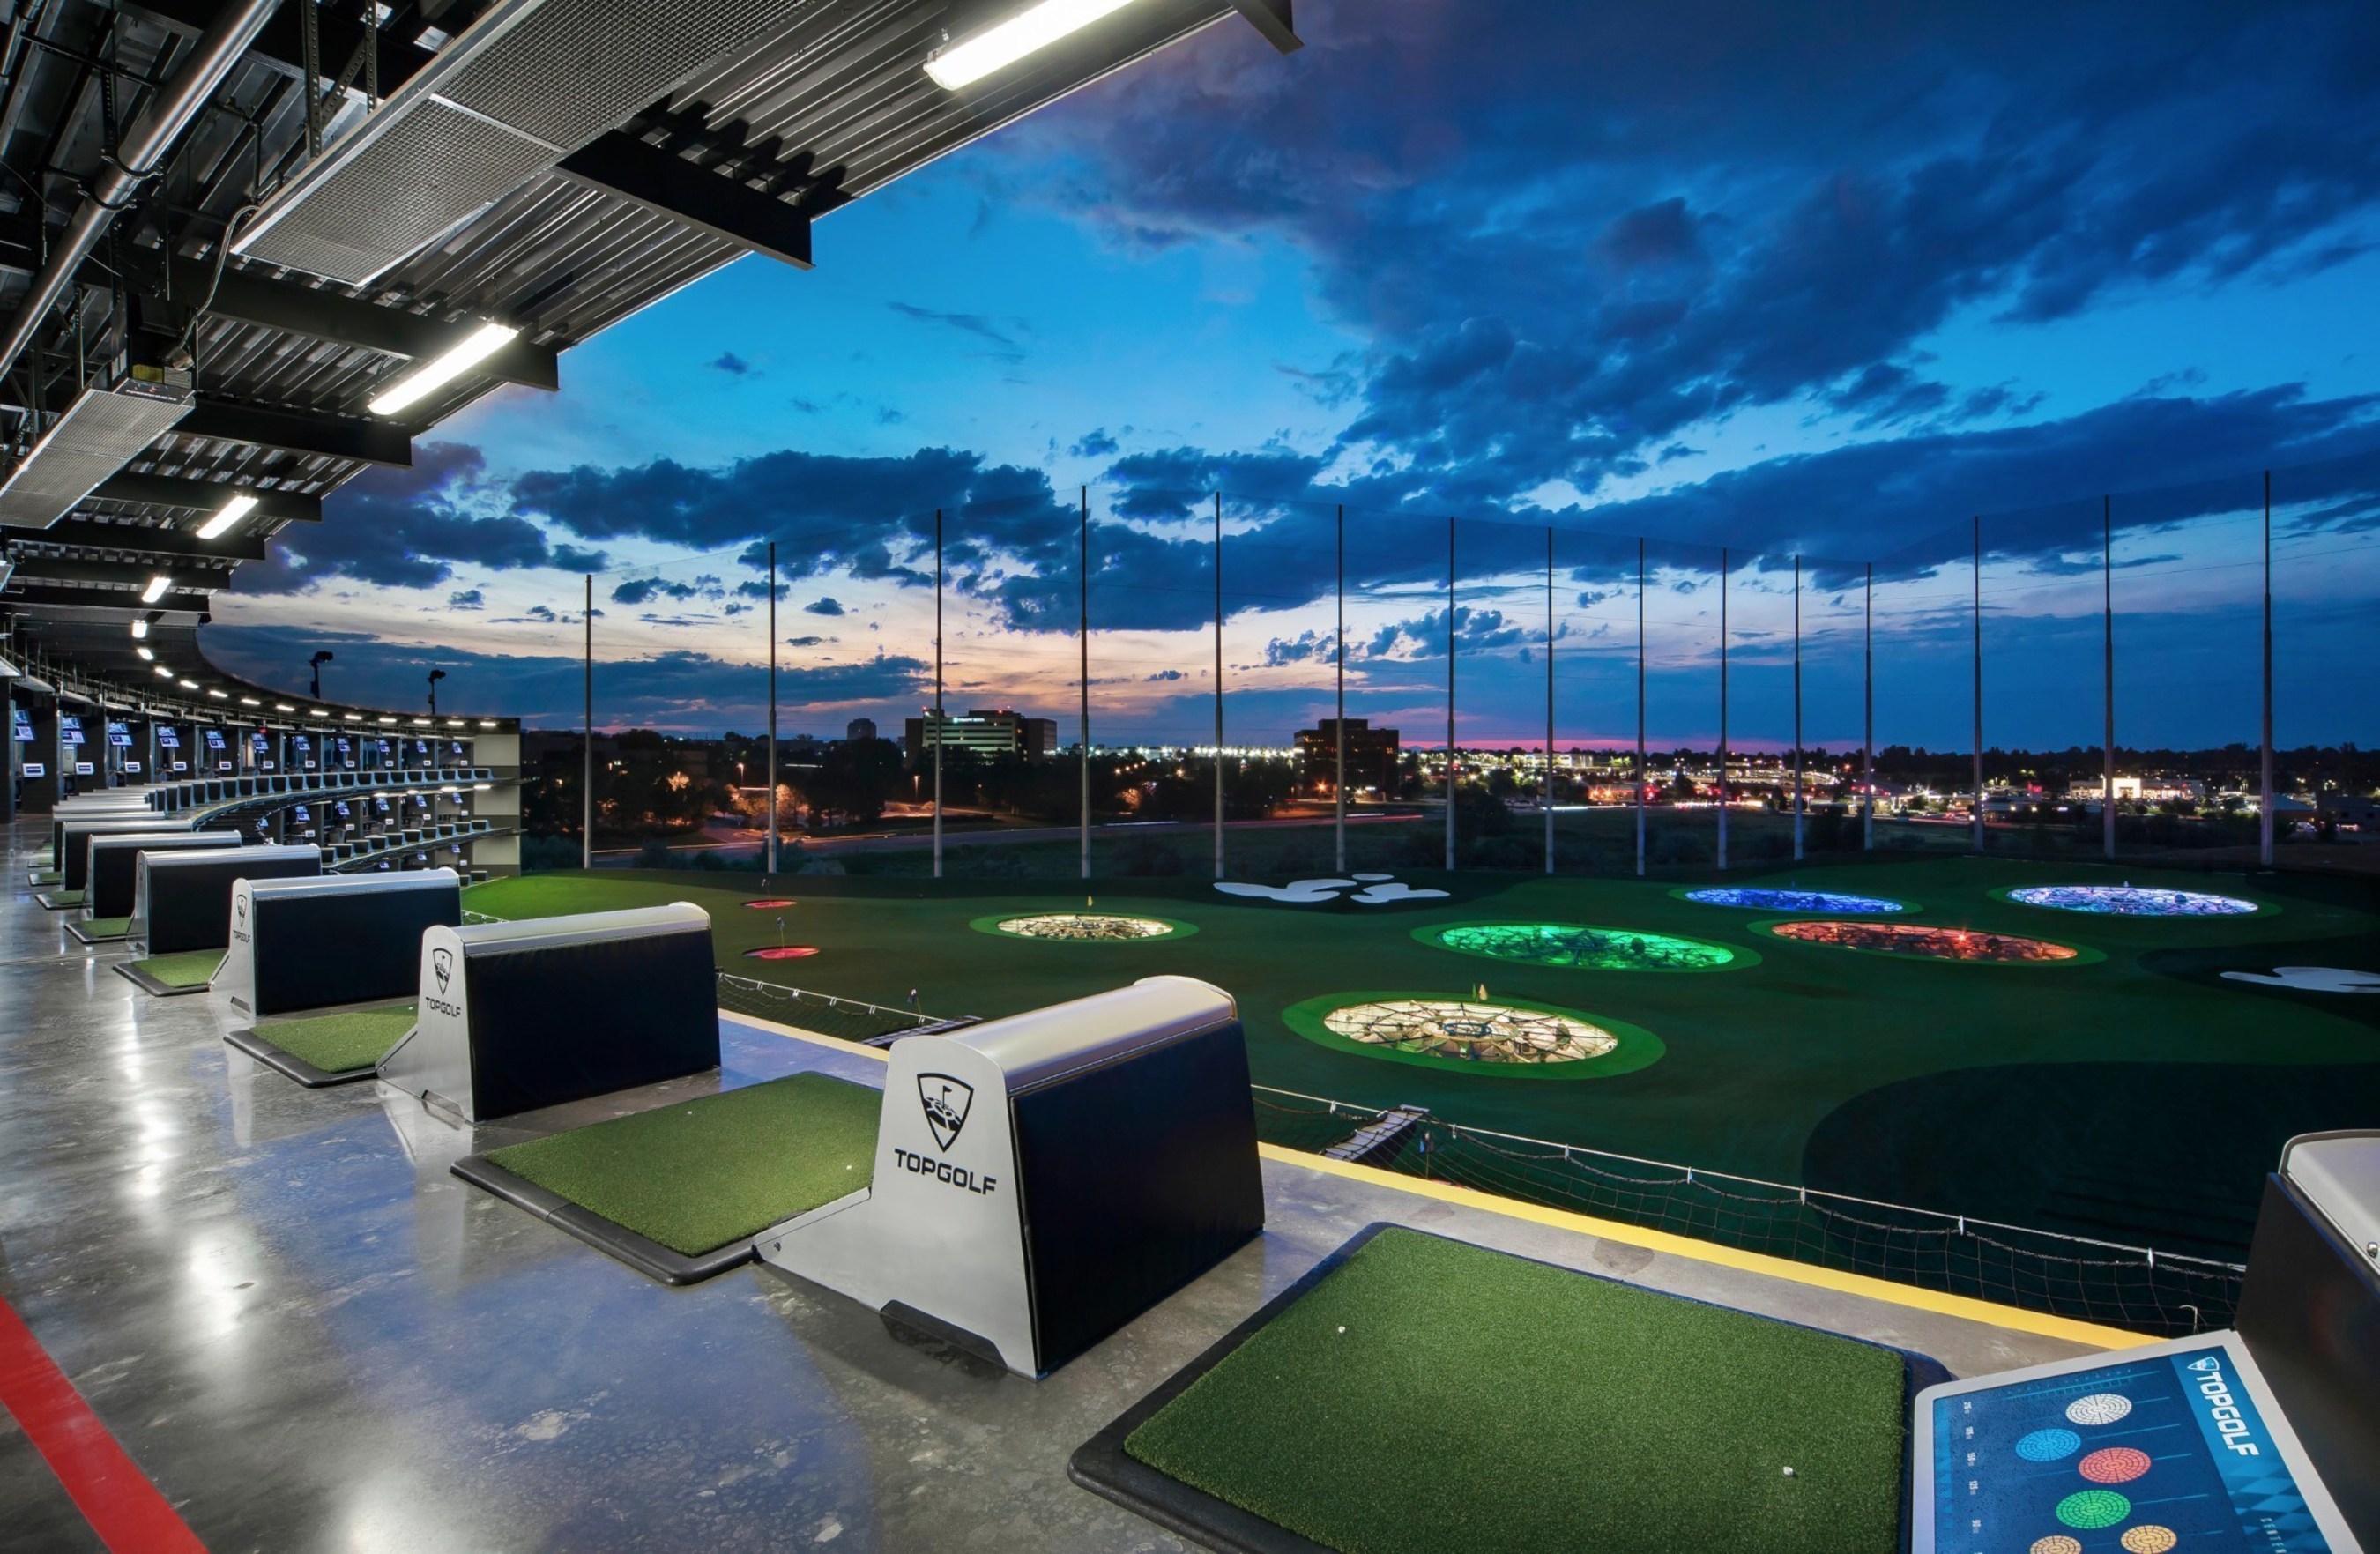 Topgolf tee line and outfield in Centennial, CO